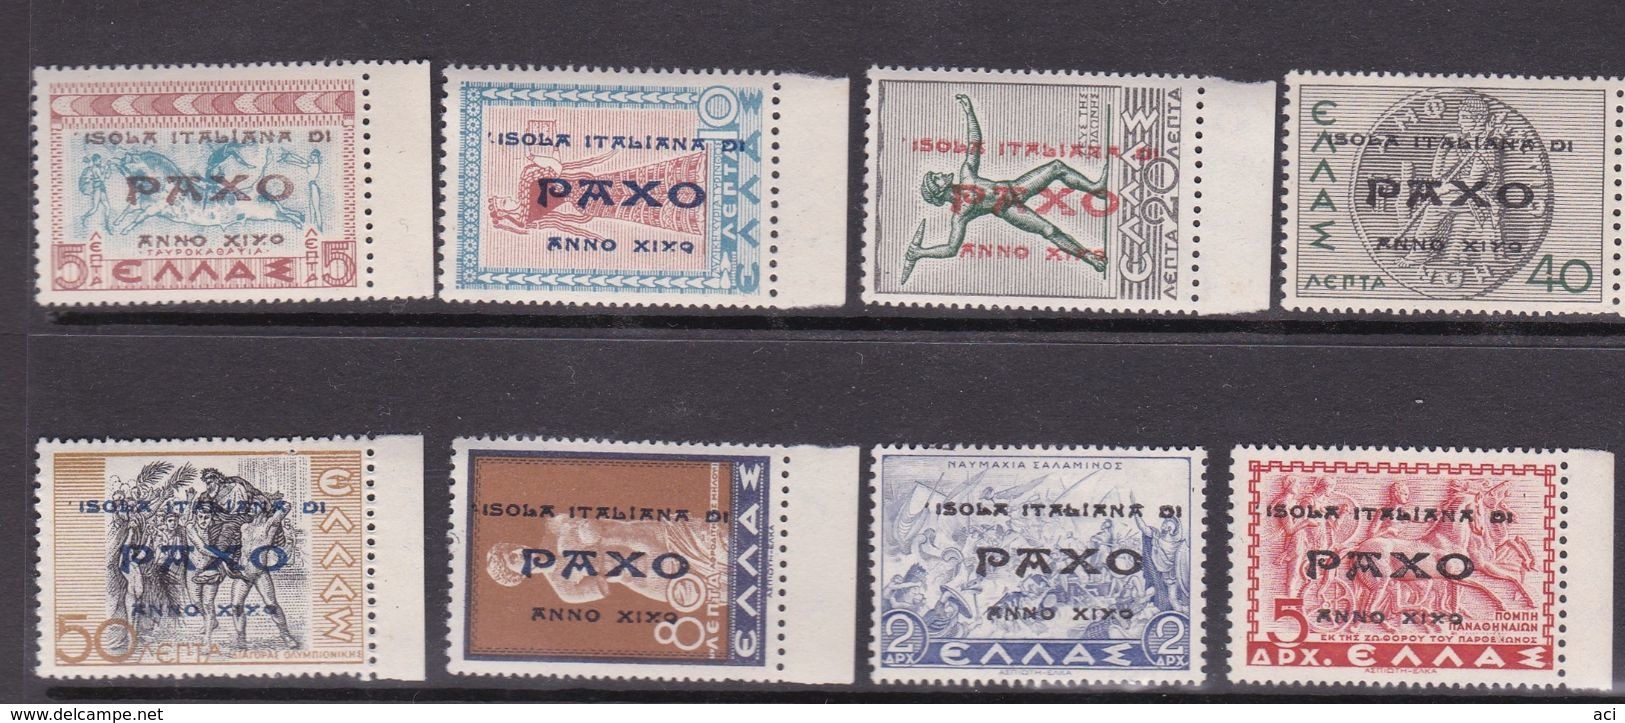 Italy-WW II Occupation-Isole Ionie, Paxos S 1-8 1942 Greek Stamps Overprinted, MNH - Isole Ionie